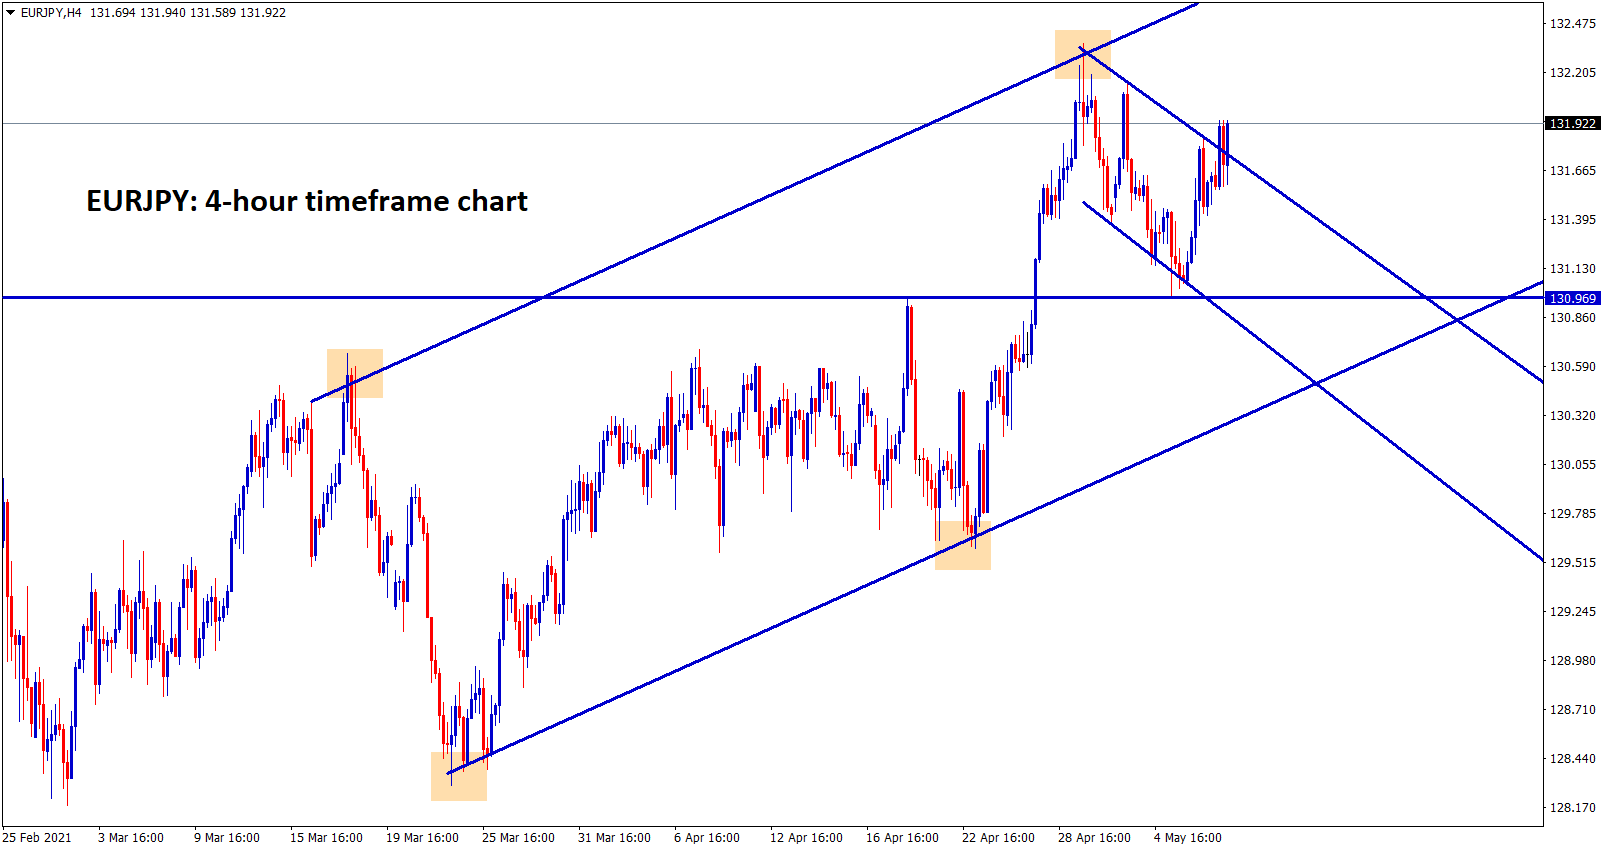 EURJPY trying to break further highs inside the minor channel